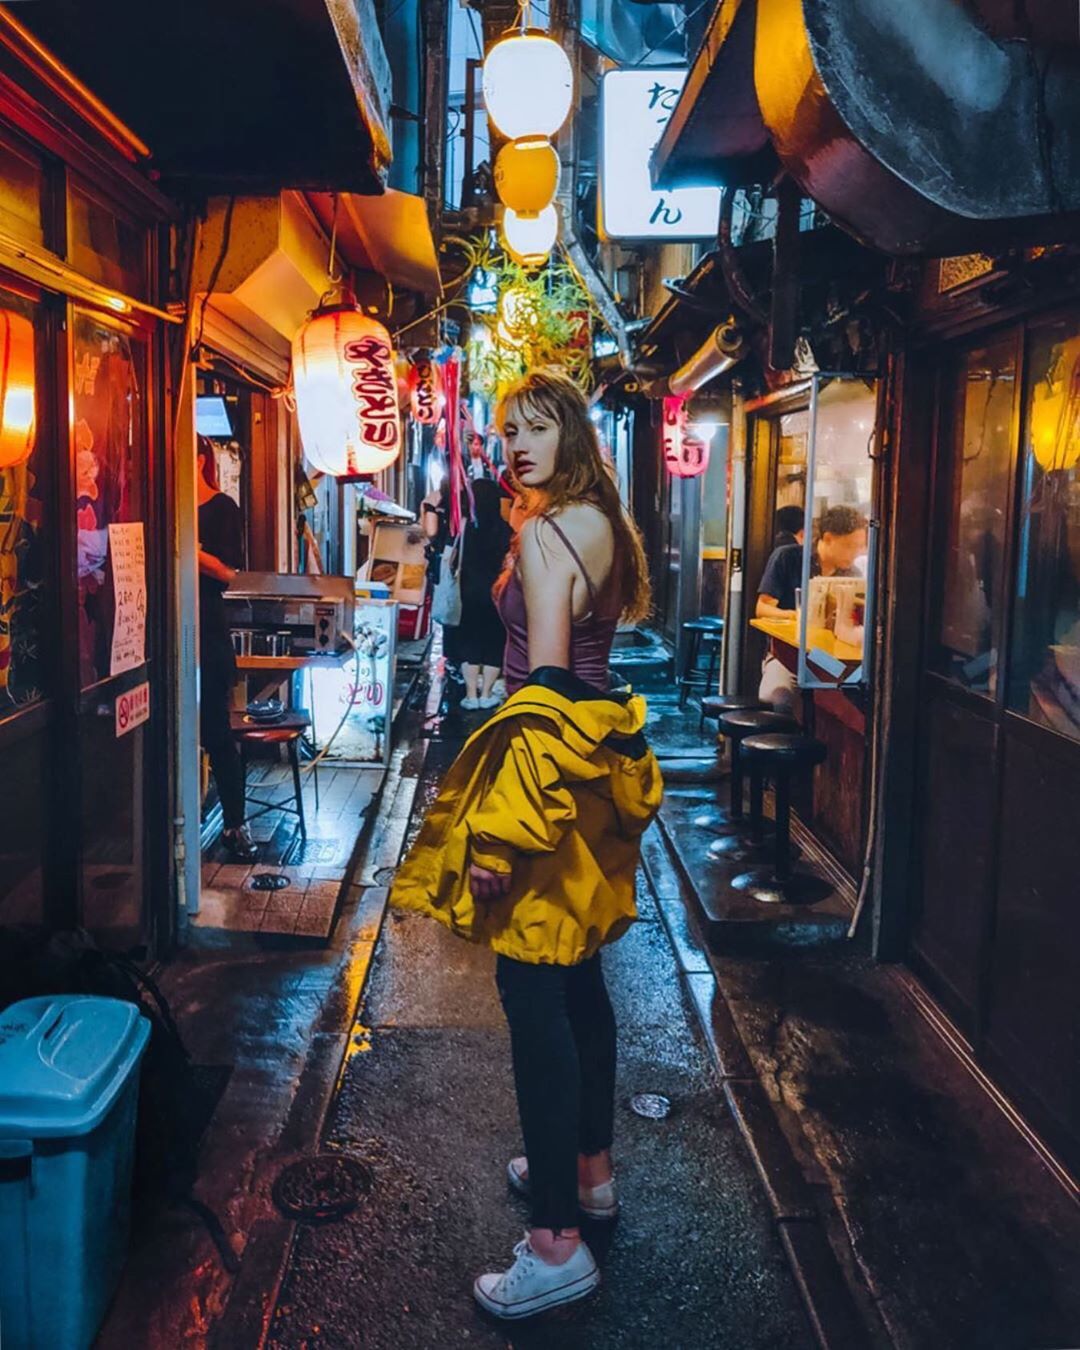 Visit Japan: Explore the narrow alleys and tiny, intimate eateries of ...